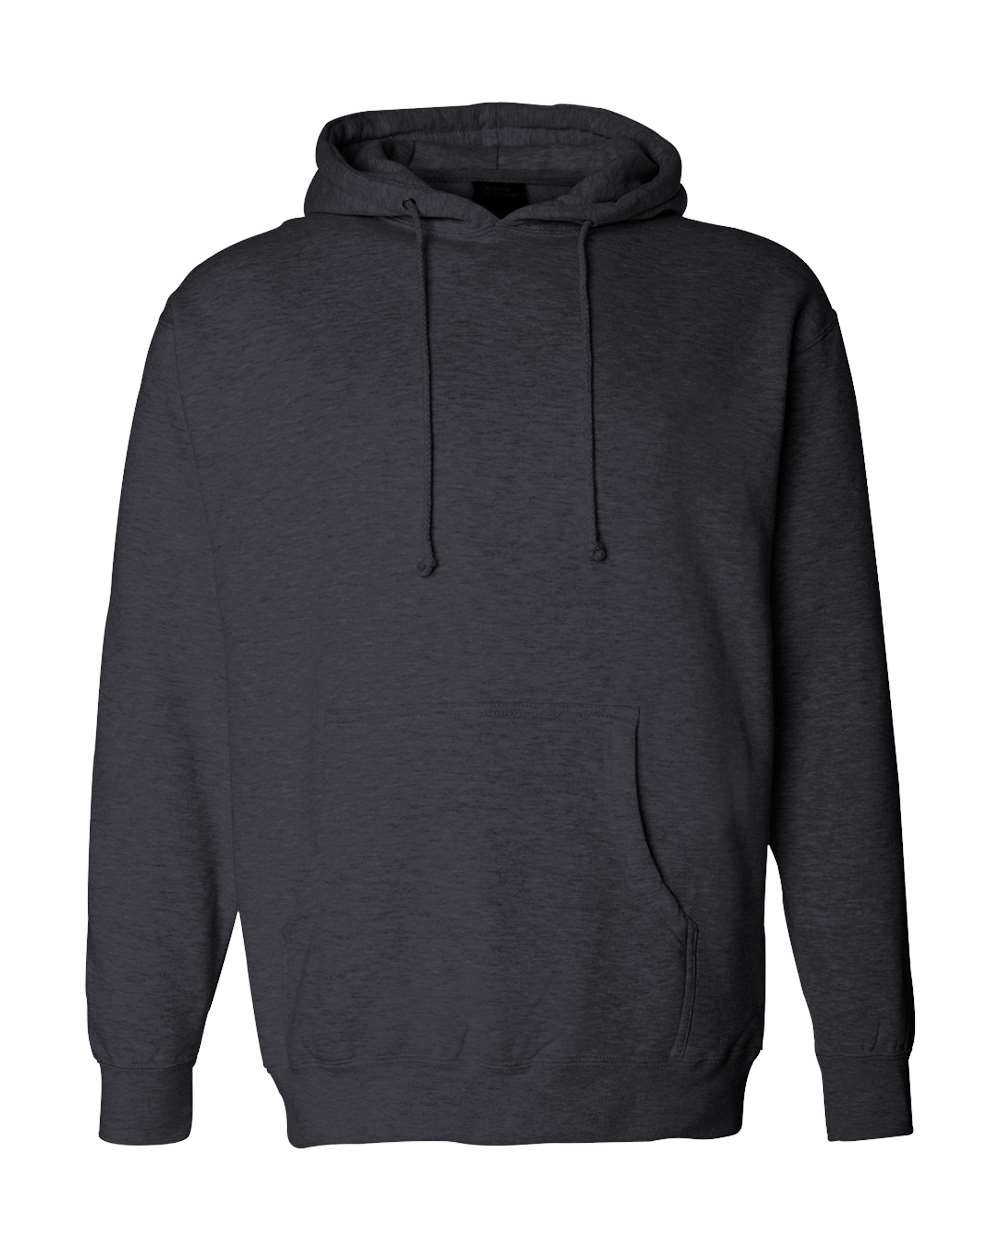 Independent Trading Co. Heavyweight Hooded Sweatshirt IND4000 #color_Charcoal Heather